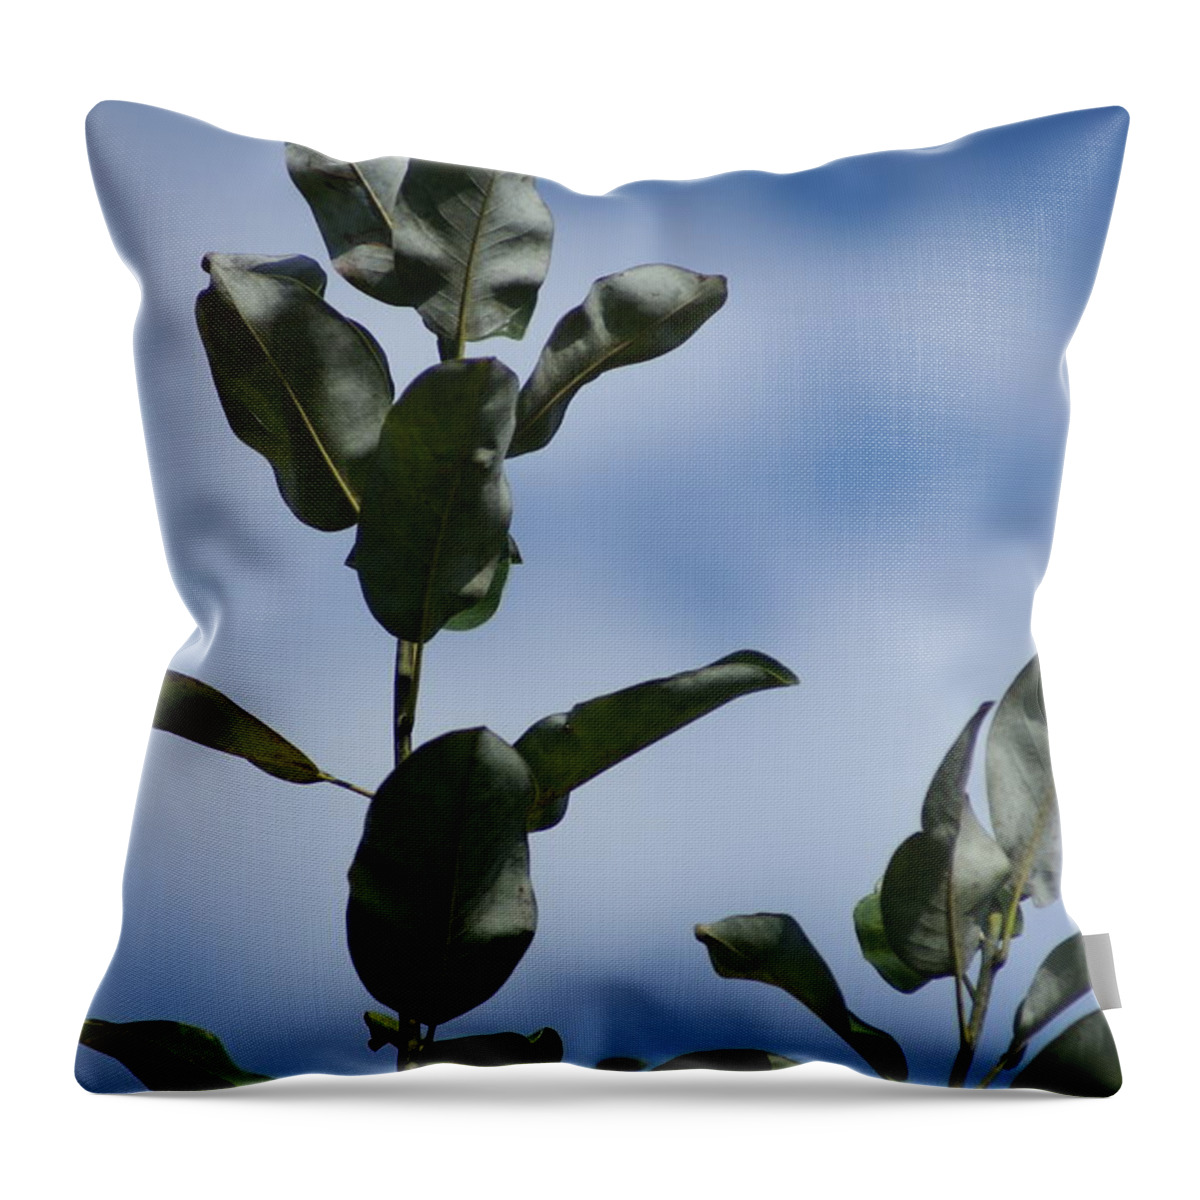  Throw Pillow featuring the photograph Sky Branches by Heather E Harman